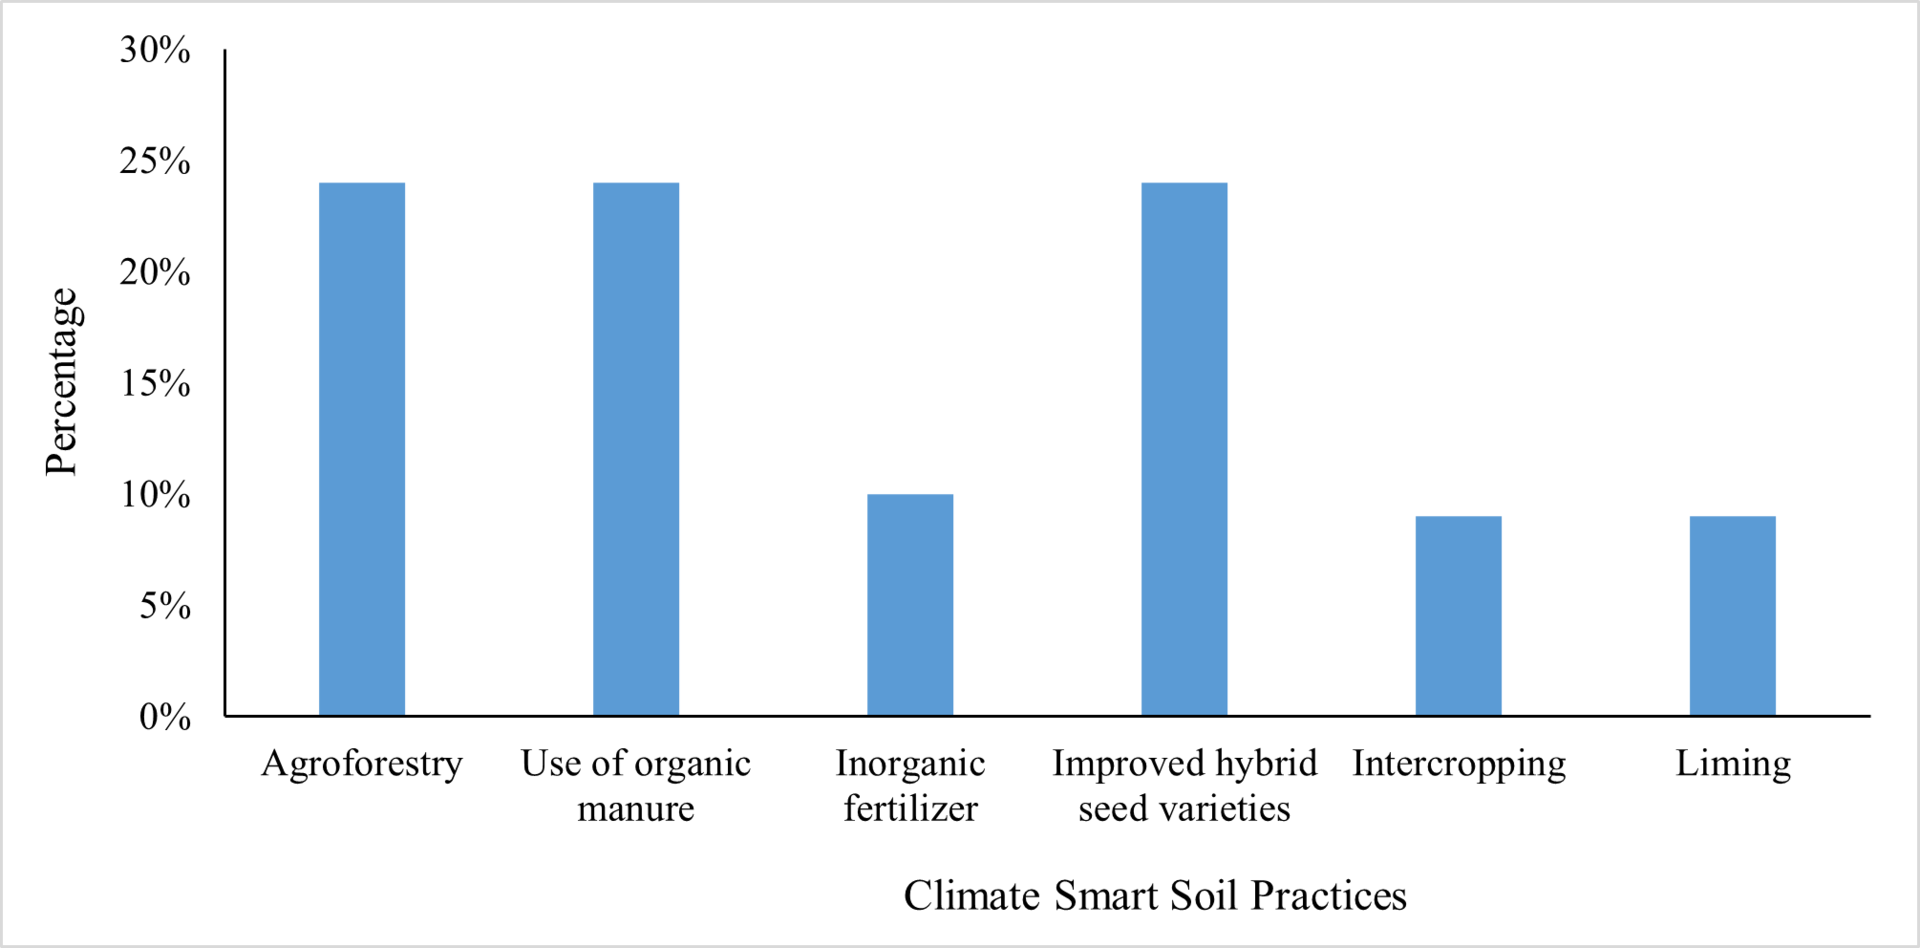 Figure 1. Proportion of farmers applying Climate Smart Soil practices on their farms 